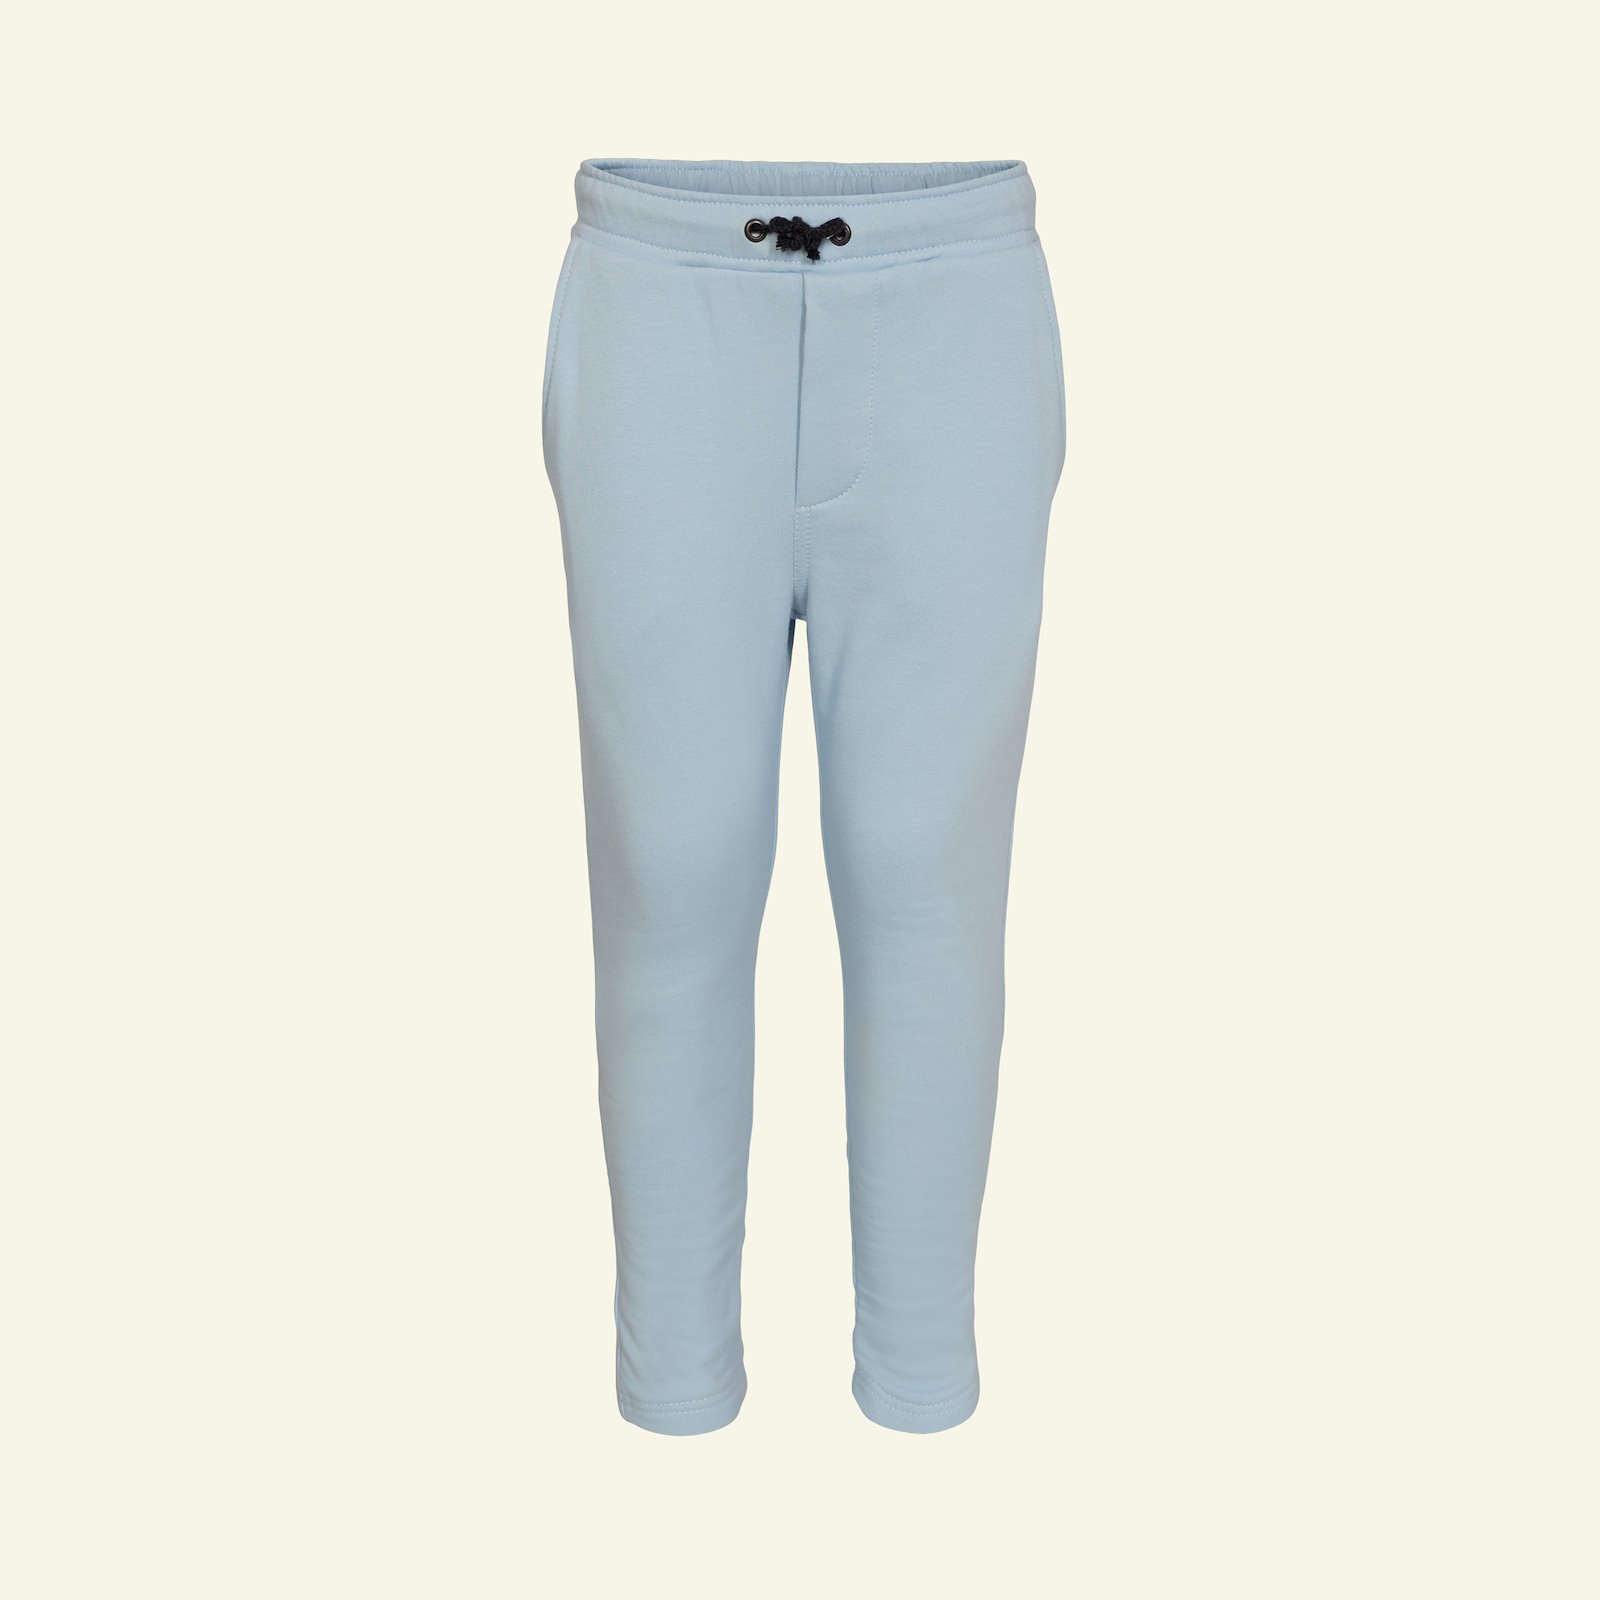 Trousers, 152/12y p60035_211777_sskit